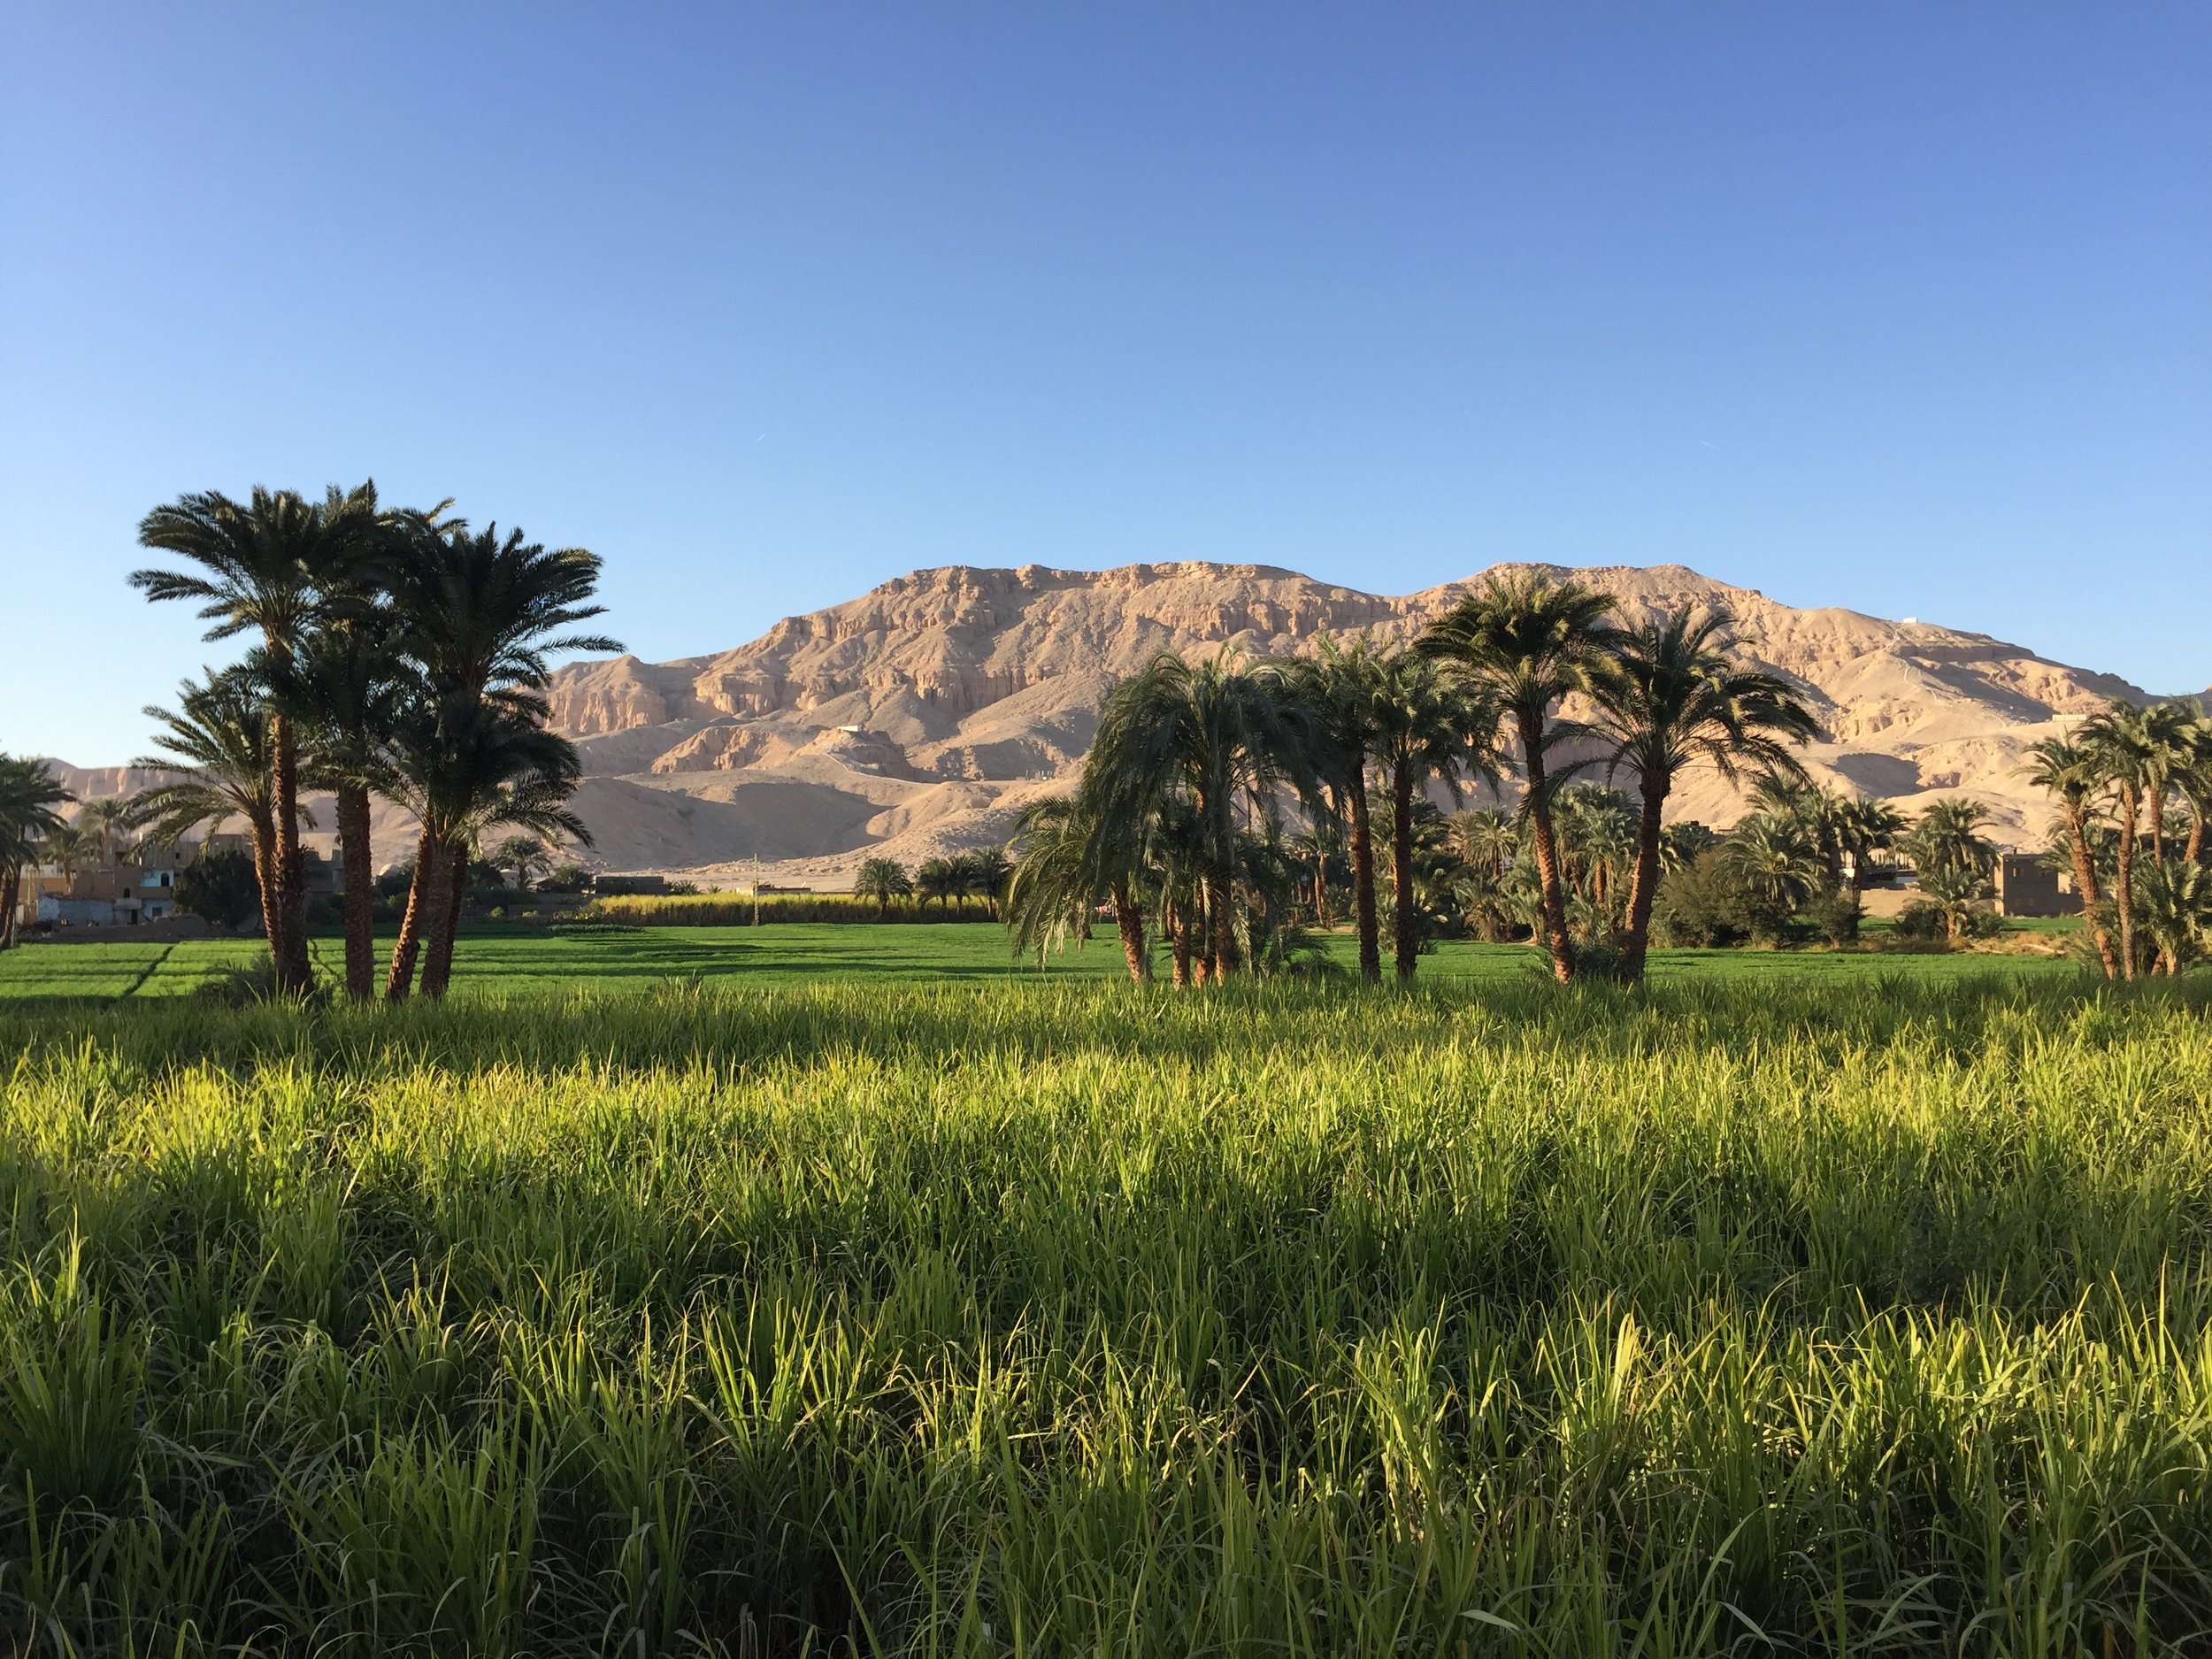  Sugar cane fields in the agricultural lands that extend across Luxor's west bank.&nbsp;  Image © Katey Corda, 2016 